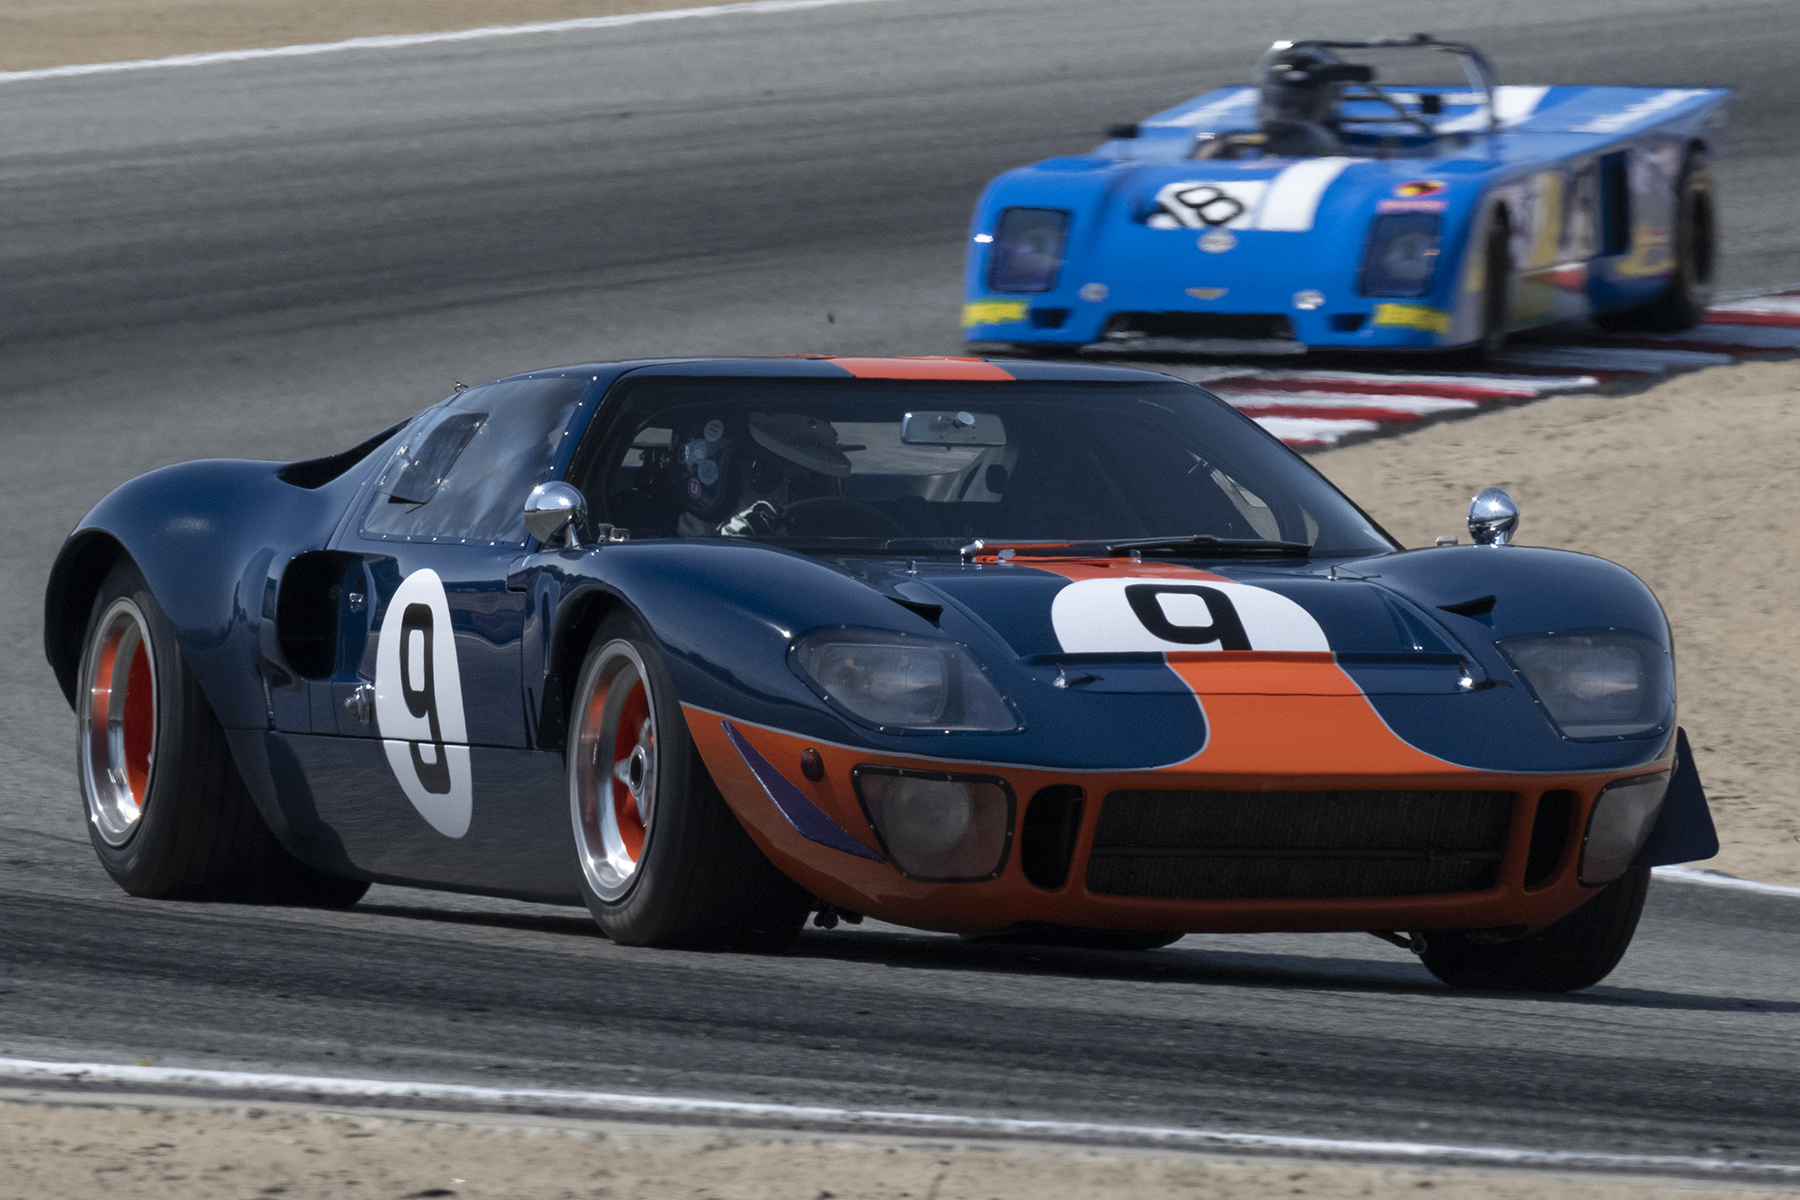 Alex MacAllister's 1966 Ford GT40 4949 exiting turn five. ©2021 Dennis Gray DENNIS GRAY